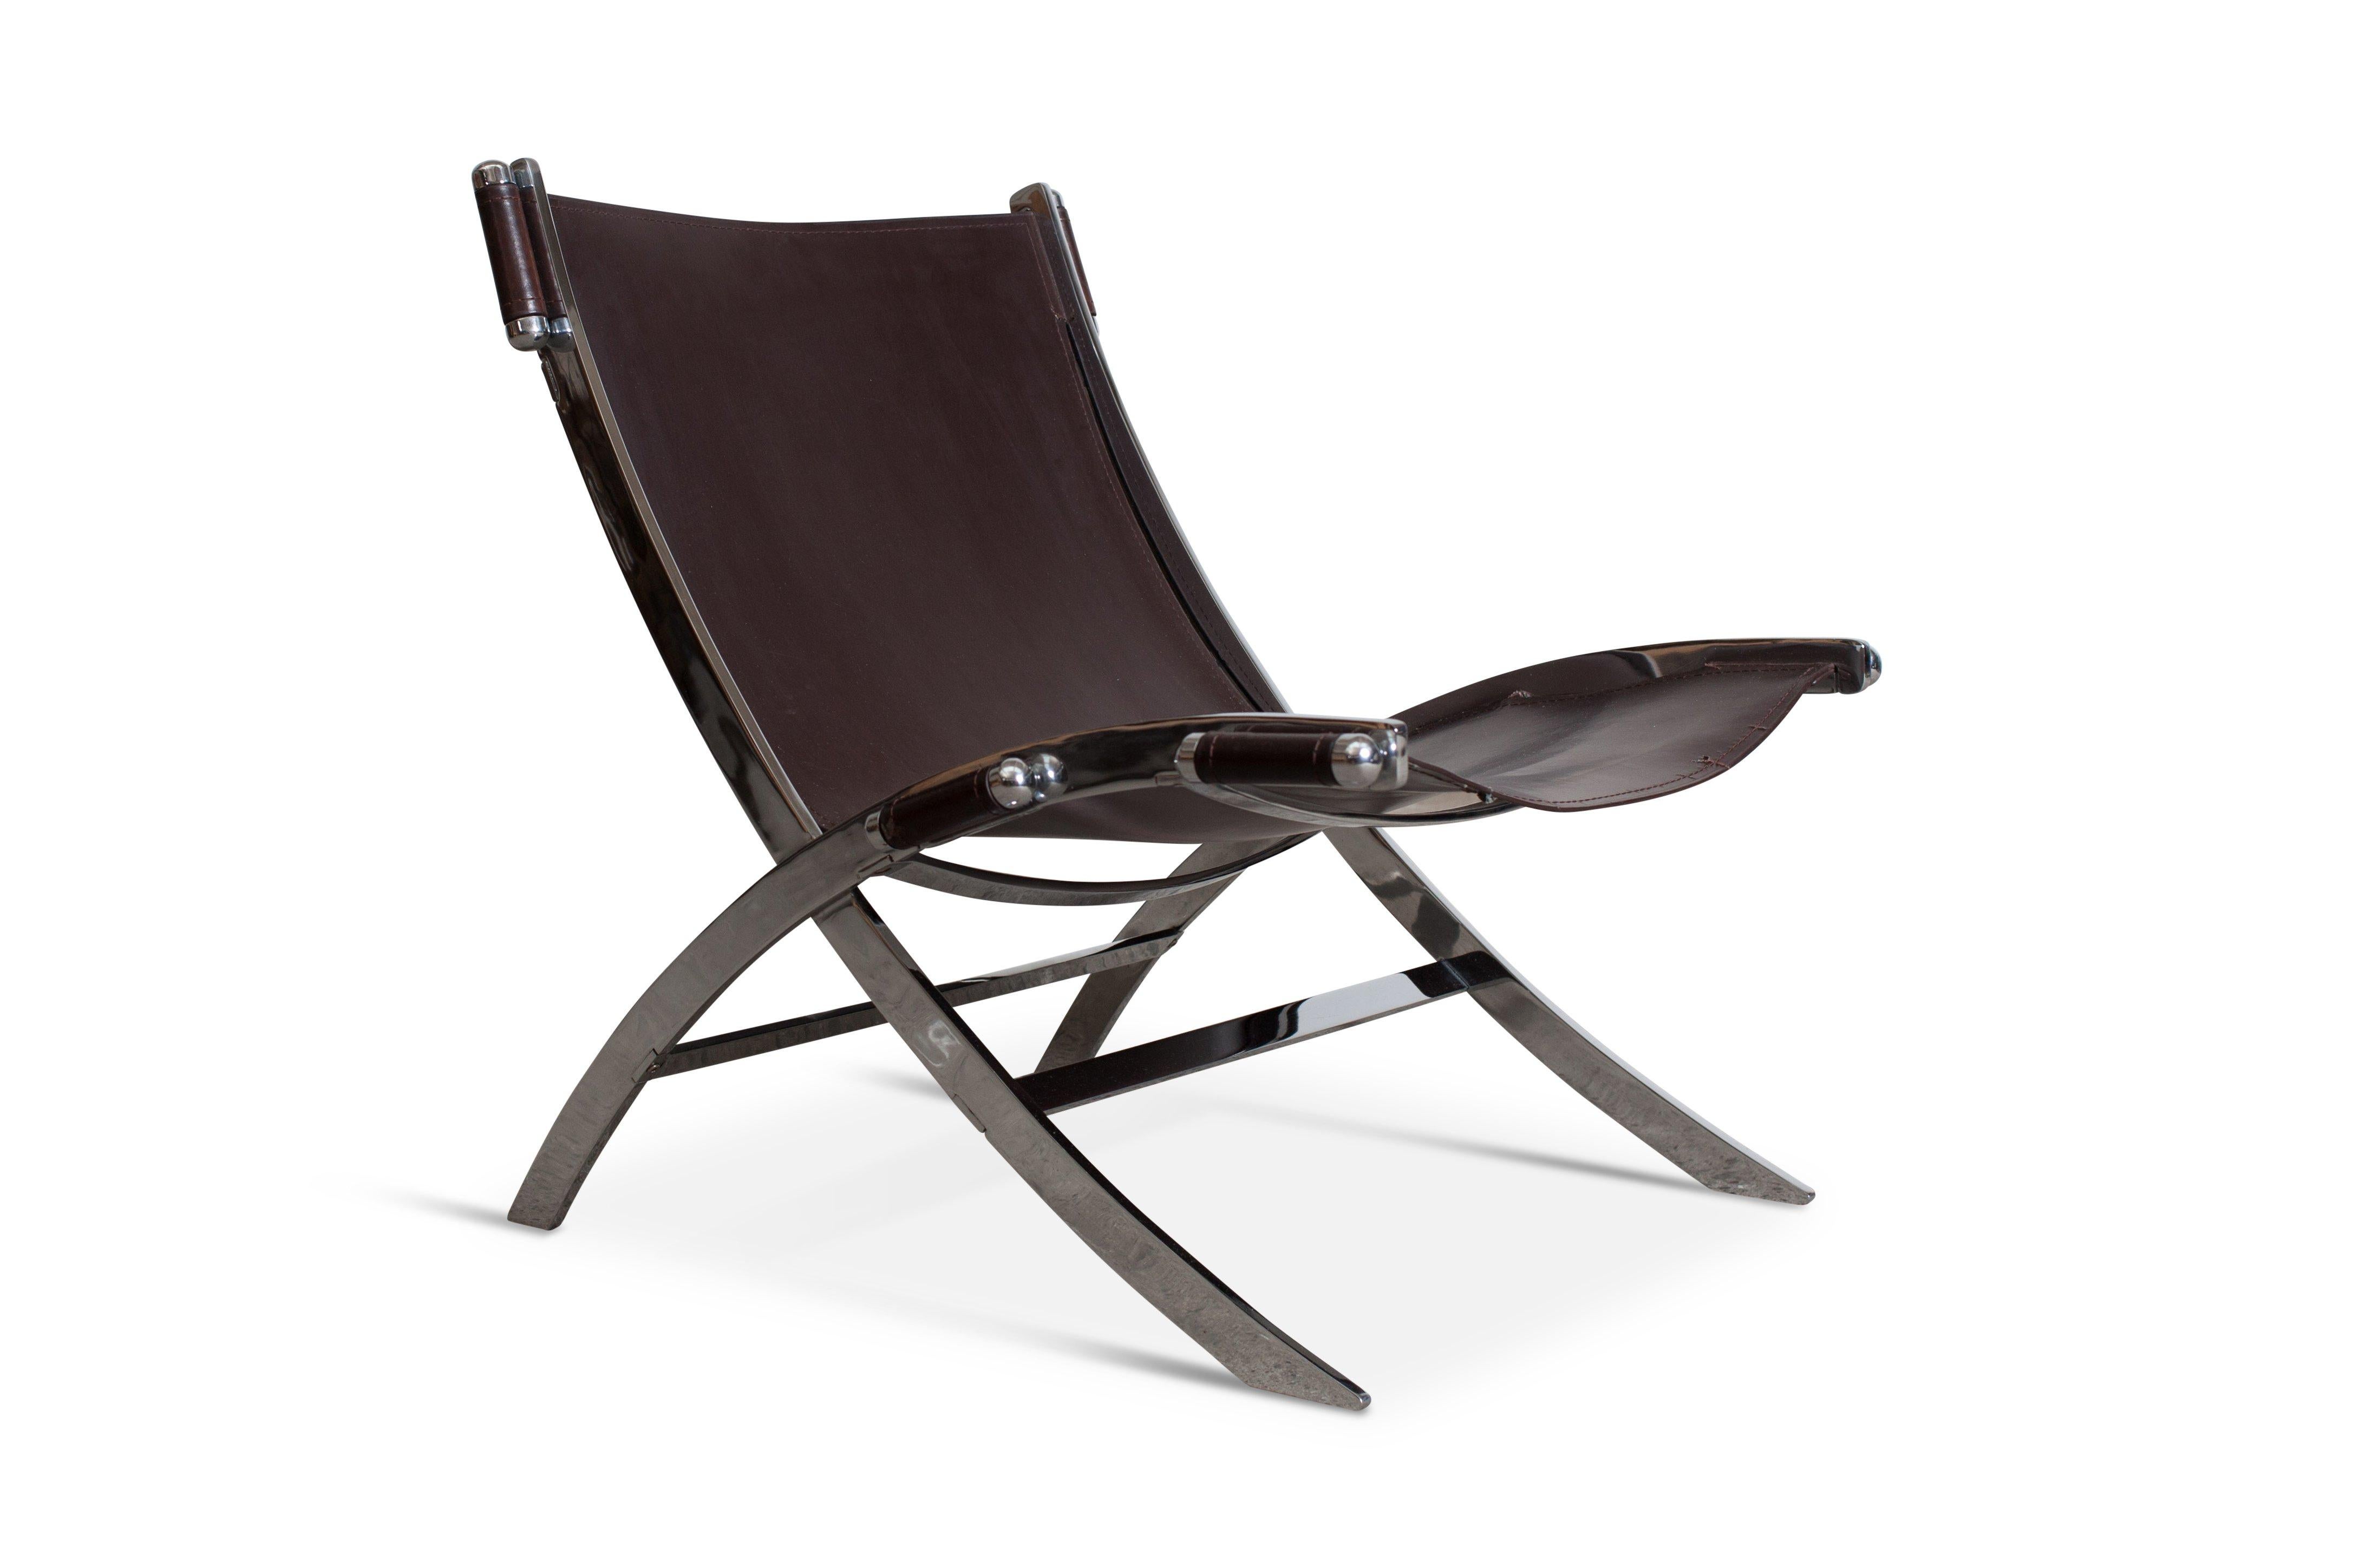 Flexform Scissor lounge chair with a chrome X-shaped frame
and dark brown leather seat, Produced by Flexform, Italy.

The thick brown leather is neatly stretched within the frame, and held in place by six
chrome cylinder shaped capsules.